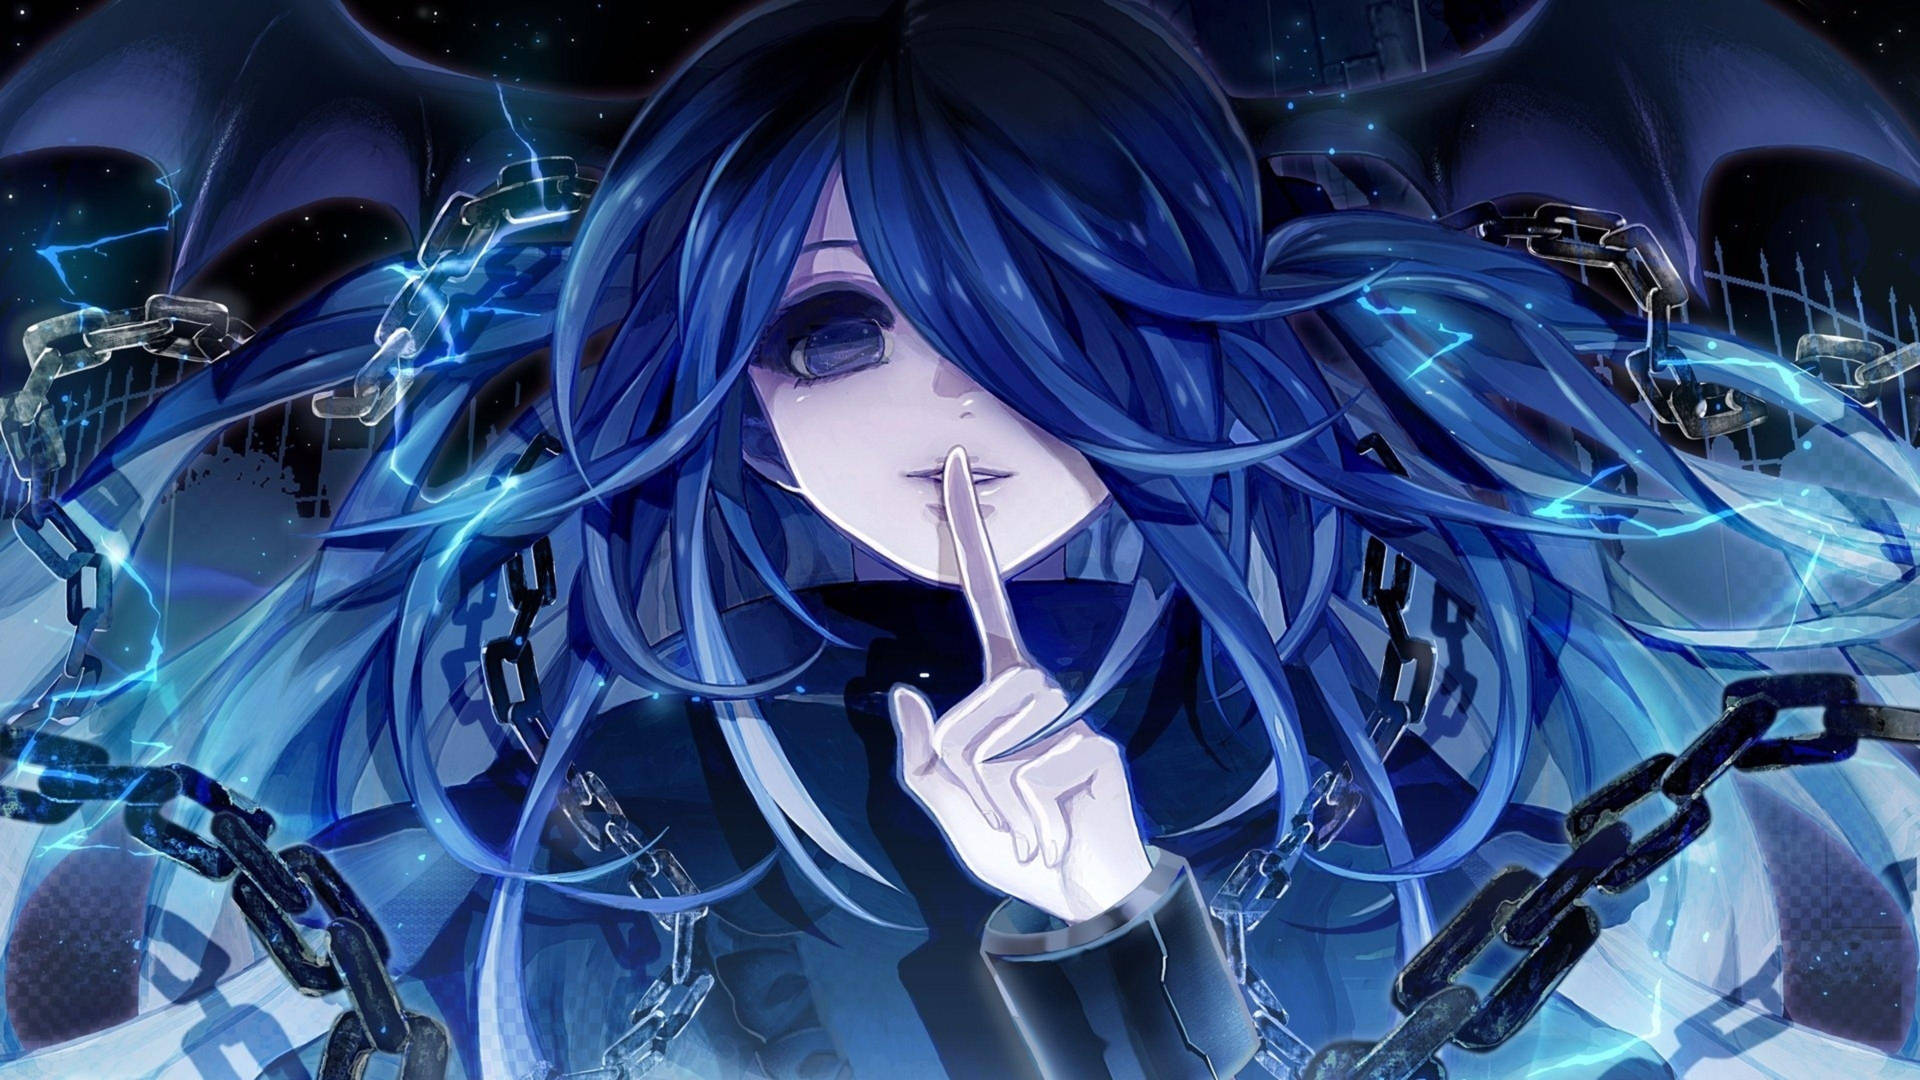 Anime Blue Girl With Chains Background